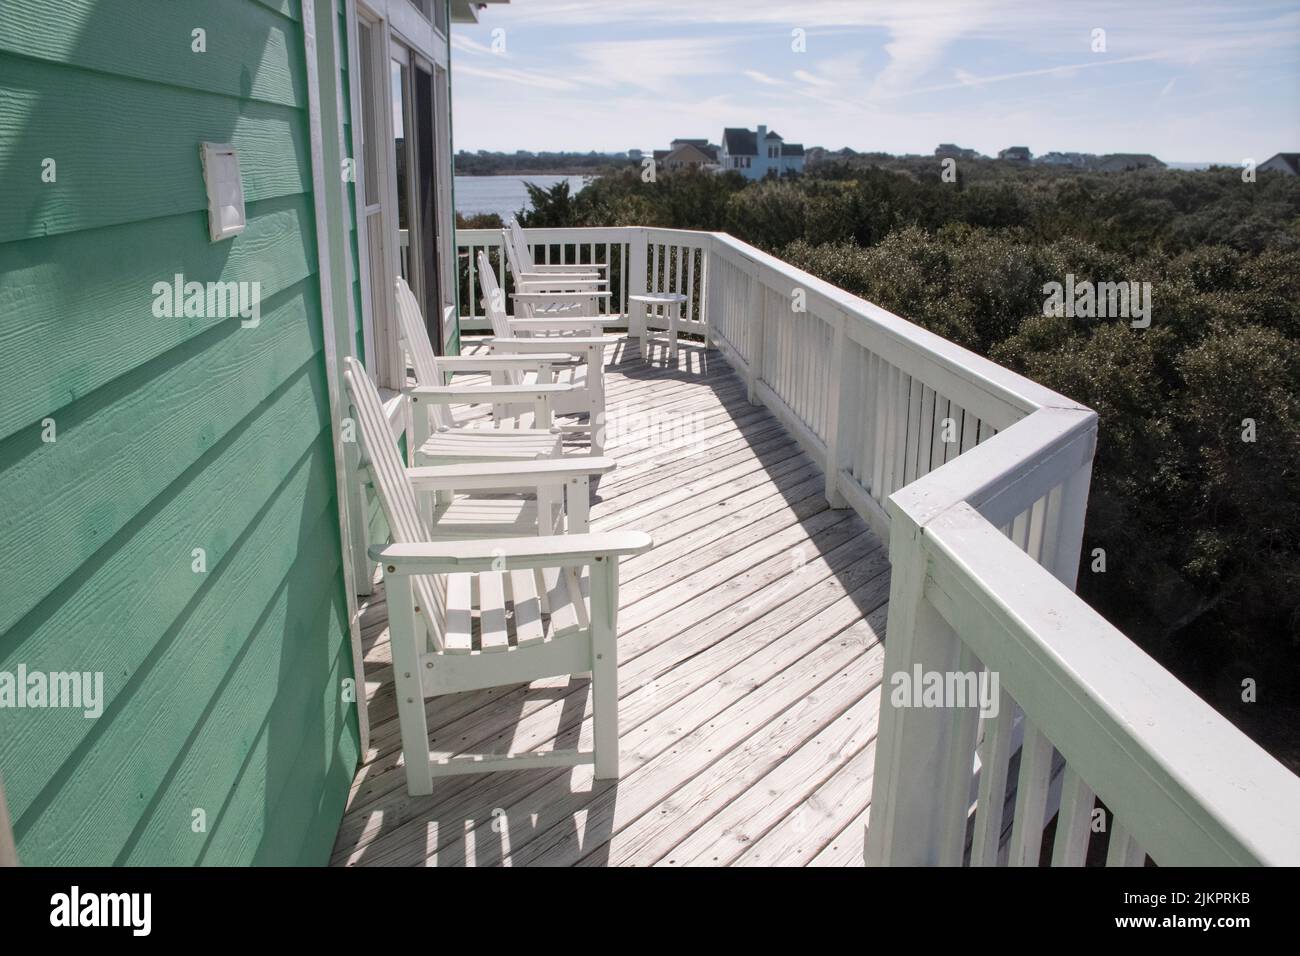 Deck chairs sit on the front deck of a house in the Outer Banks in preparation for the upcoming sunset Stock Photo